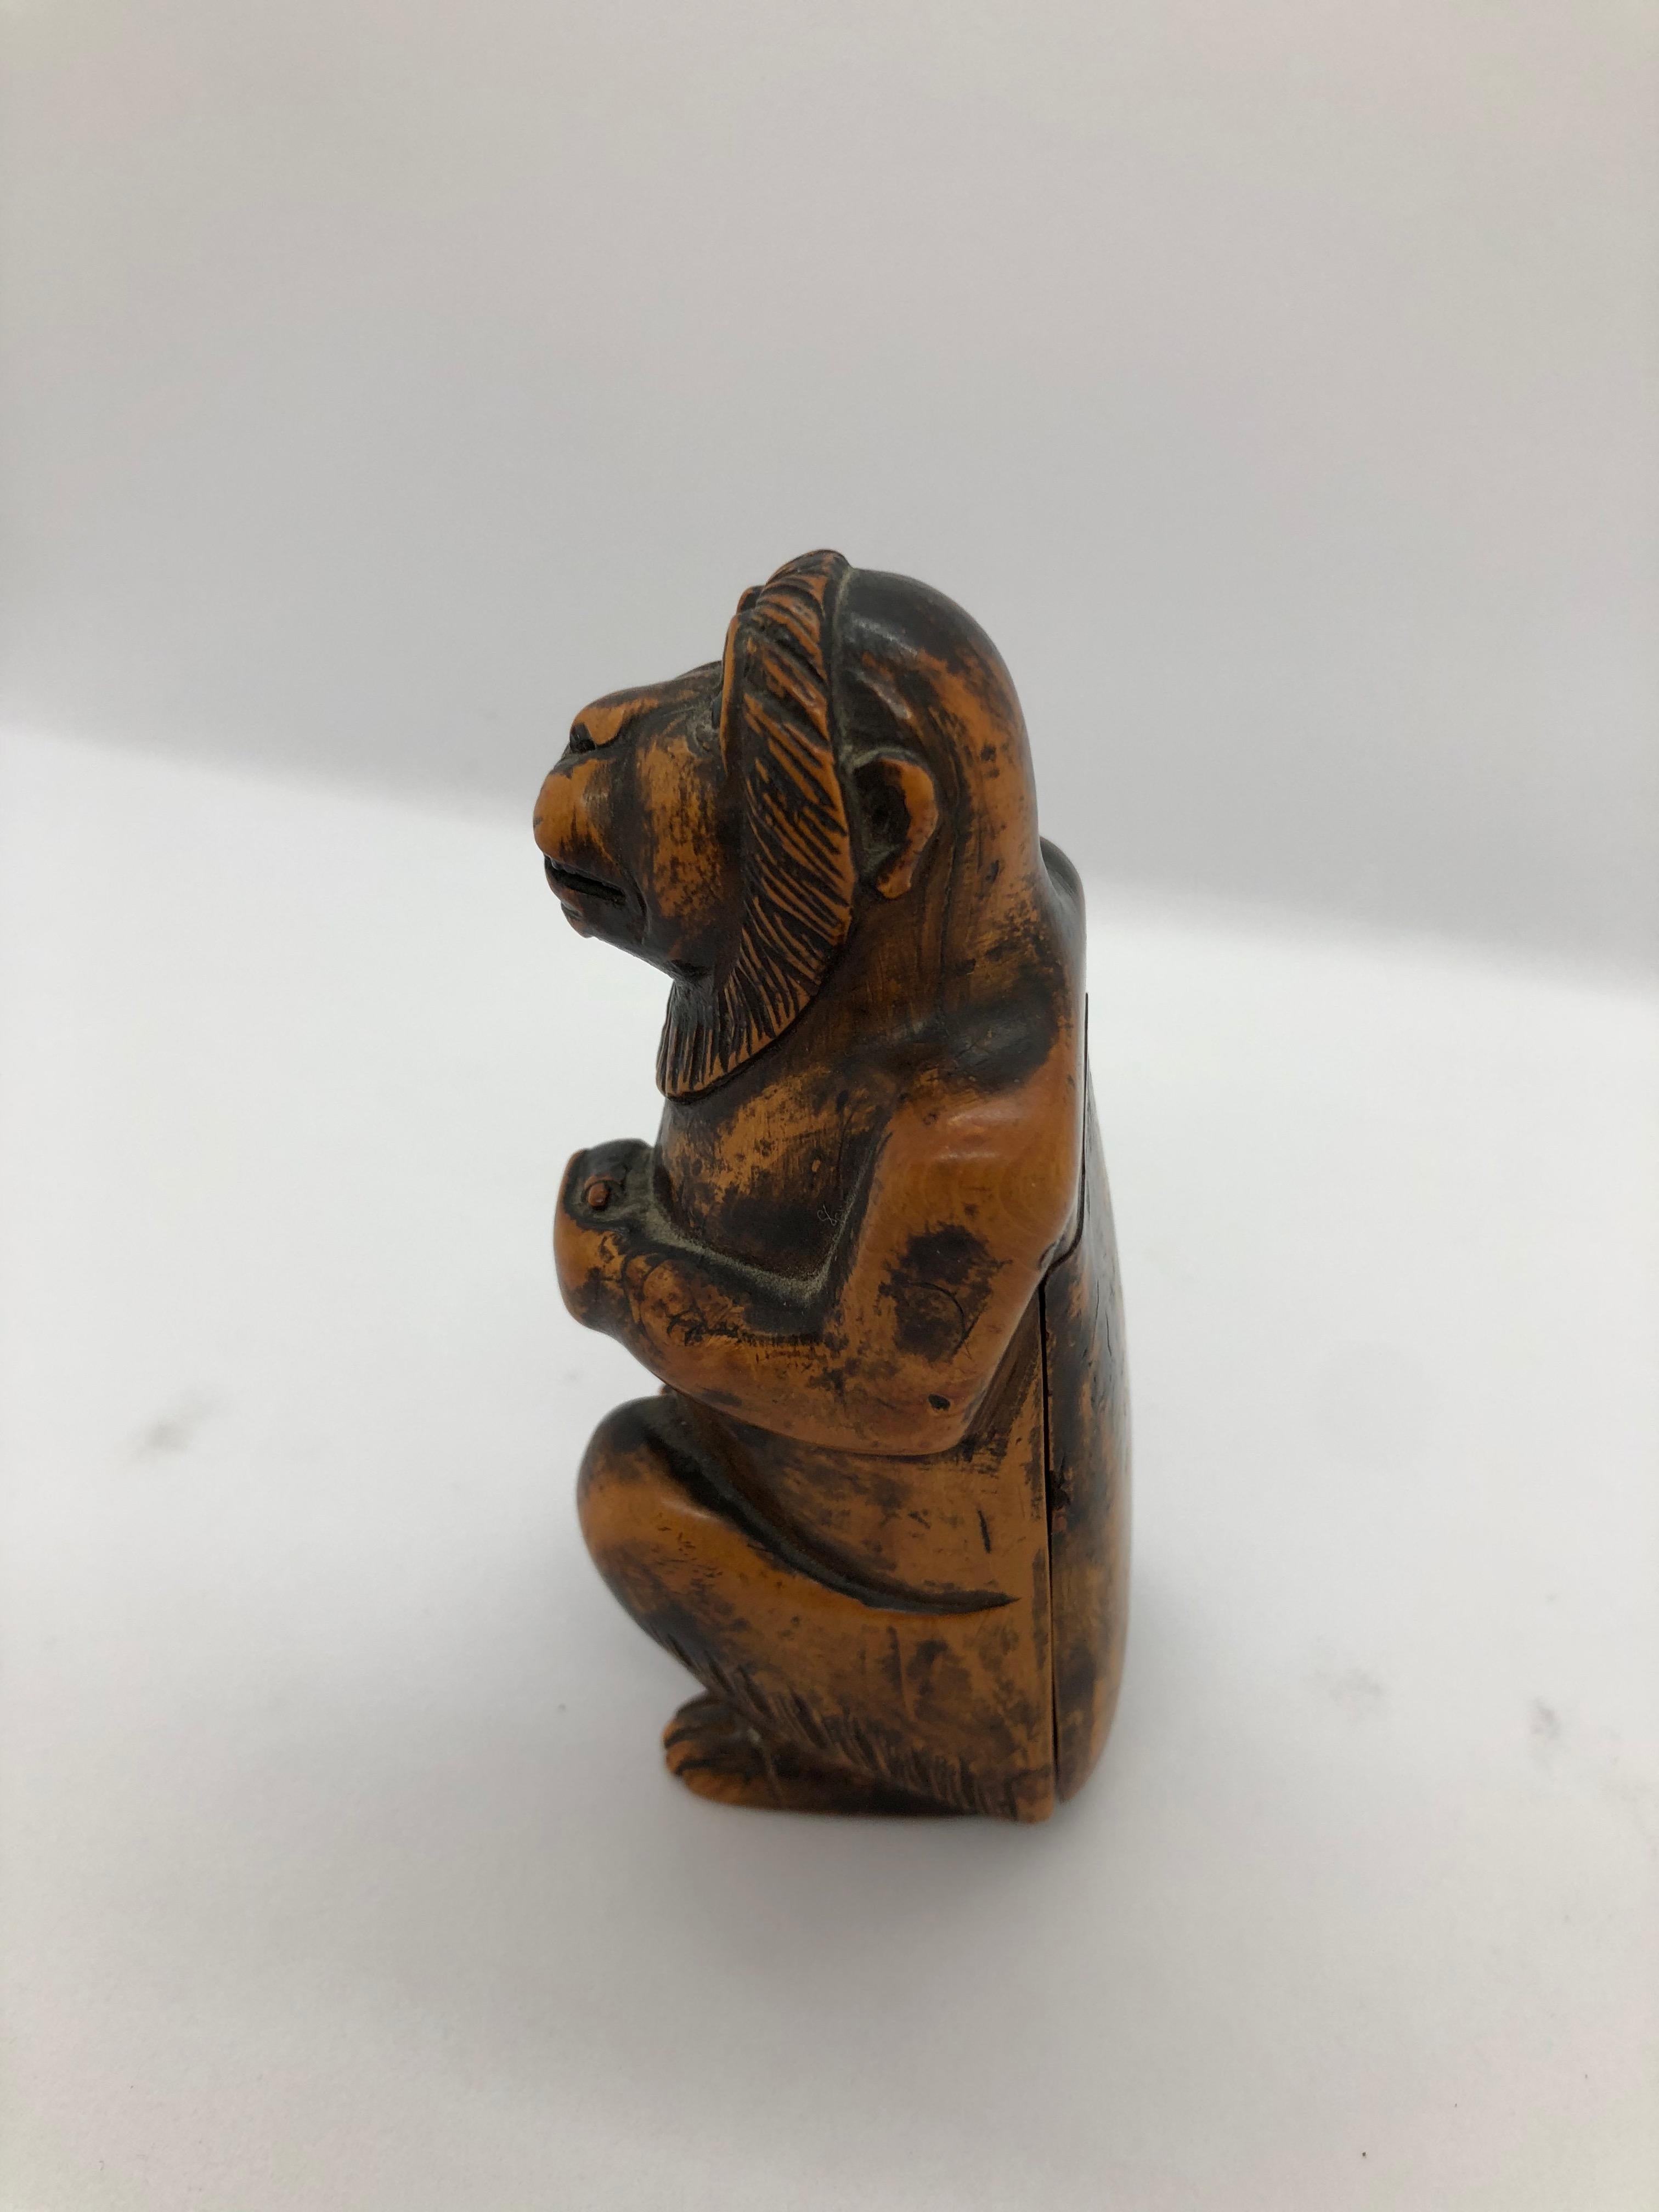 An unusual and interesting box in the shape of a monkey. Probably a snuffbox. Carved of wood and on the inside it’s veneered with a blank hard material, some kind of shell. Made in the late 18th or early 19th century.